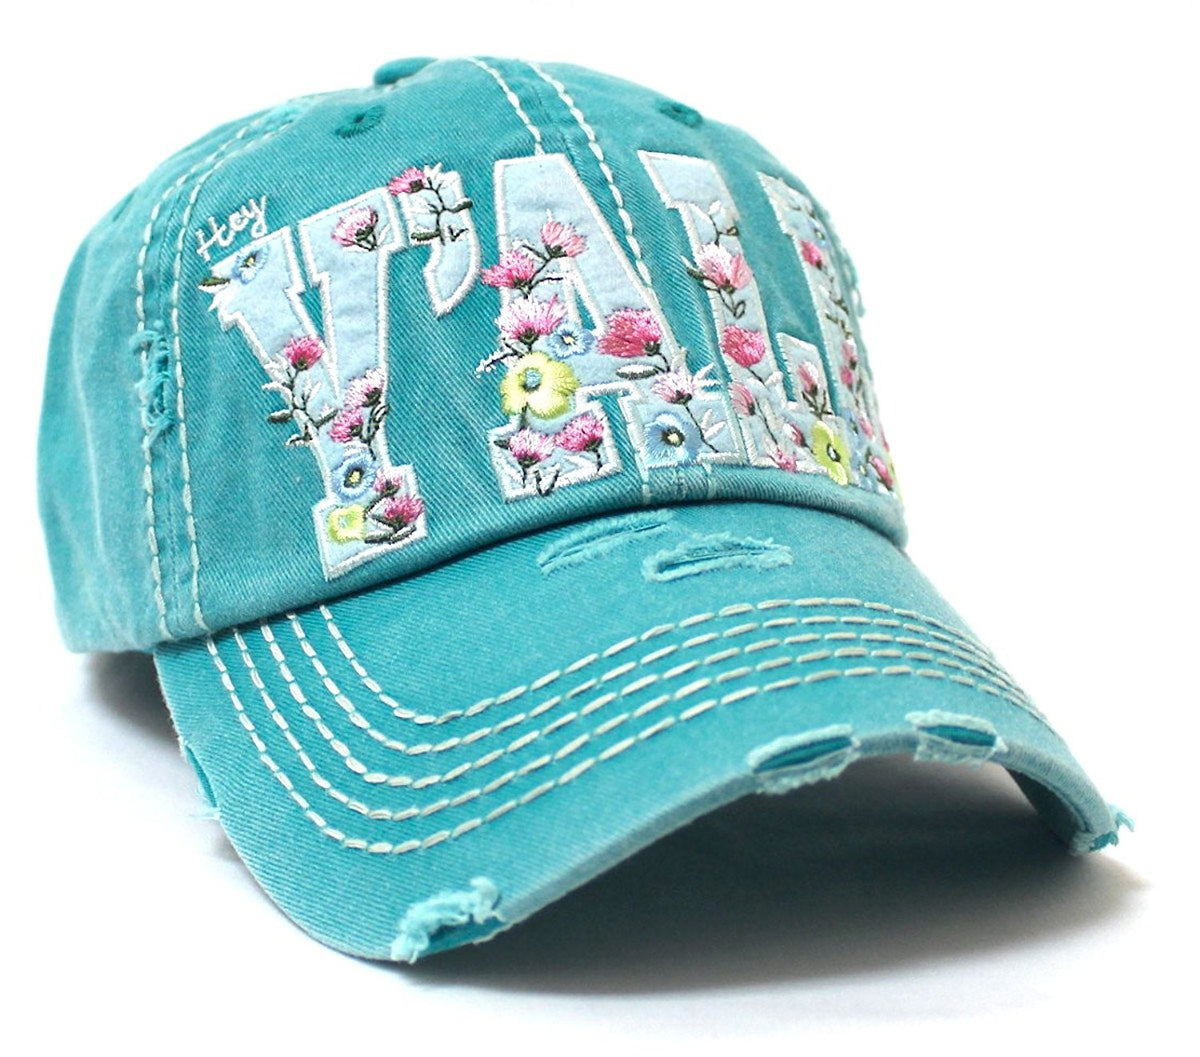 CAPS 'N VINTAGE Turquoise Floral Embroidery Hey Y'all Vintage Hat - Caps 'N Vintage 